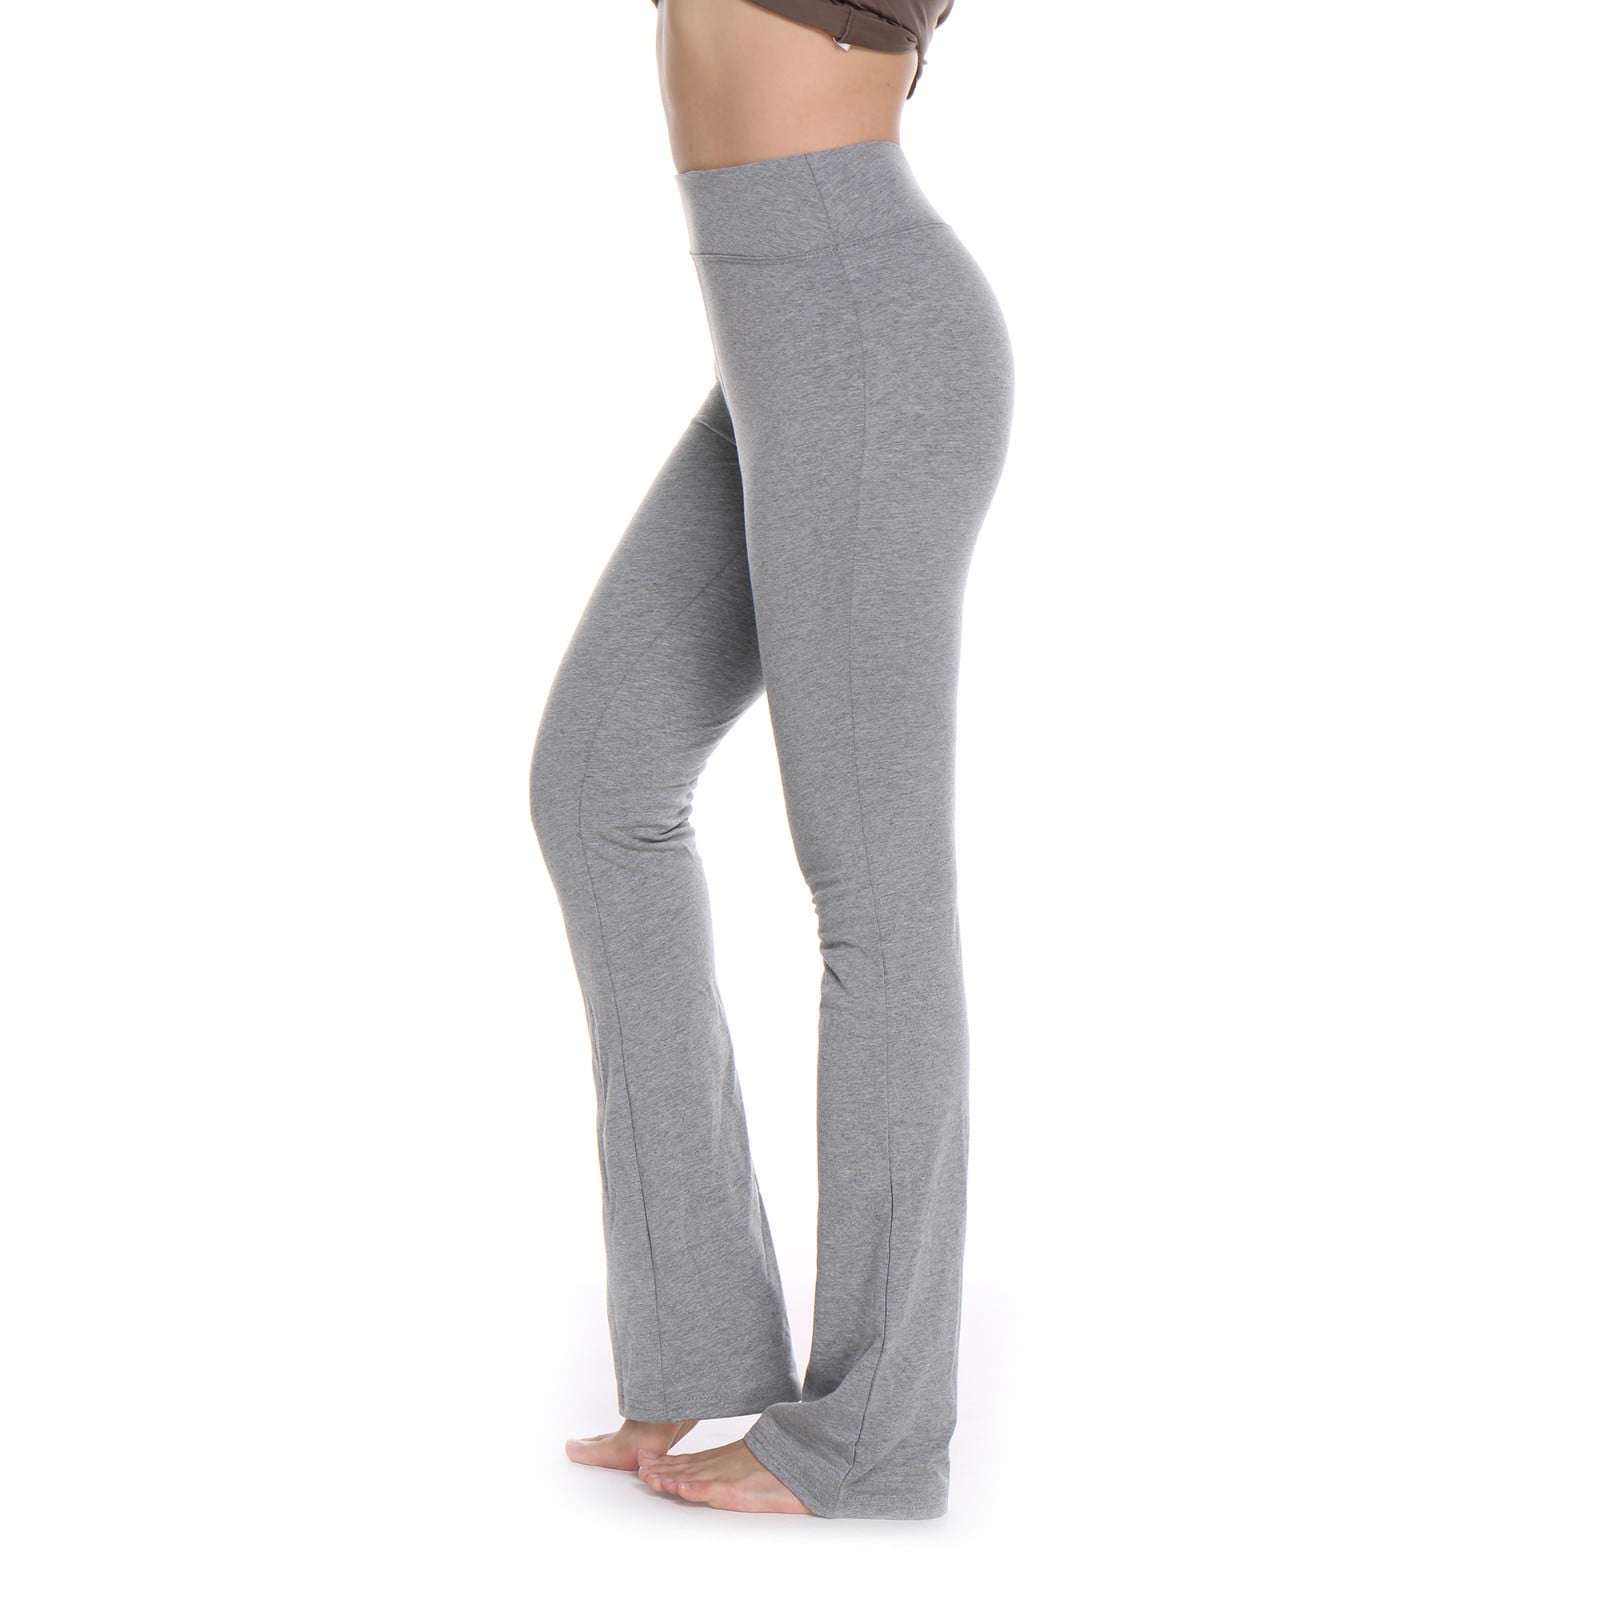 flare workout pants